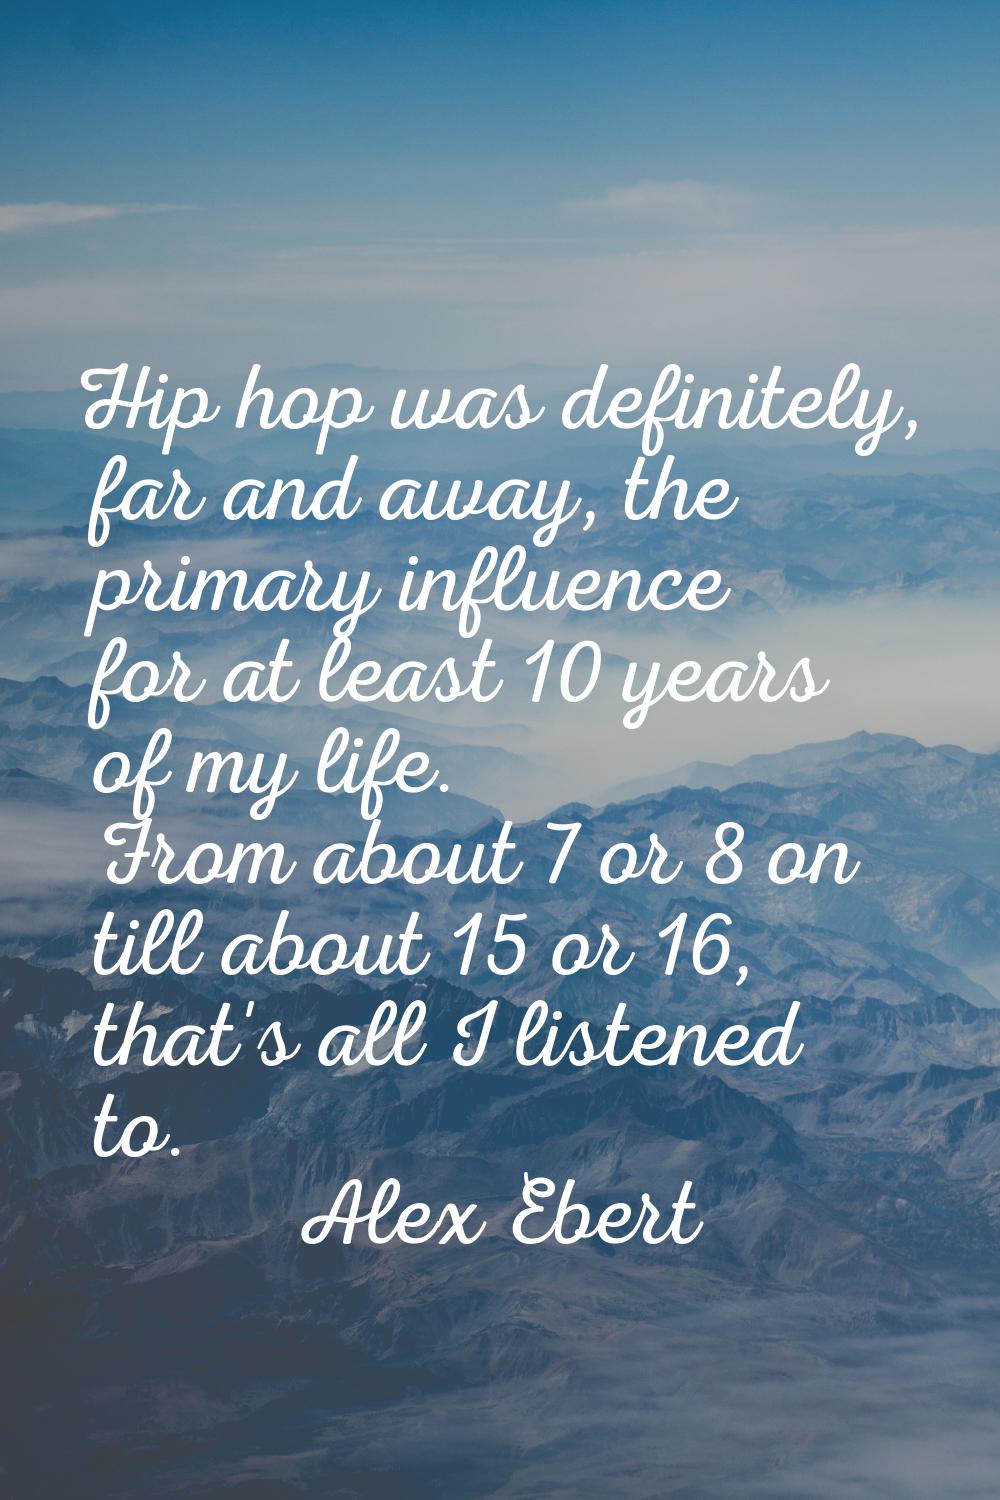 Hip hop was definitely, far and away, the primary influence for at least 10 years of my life. From 